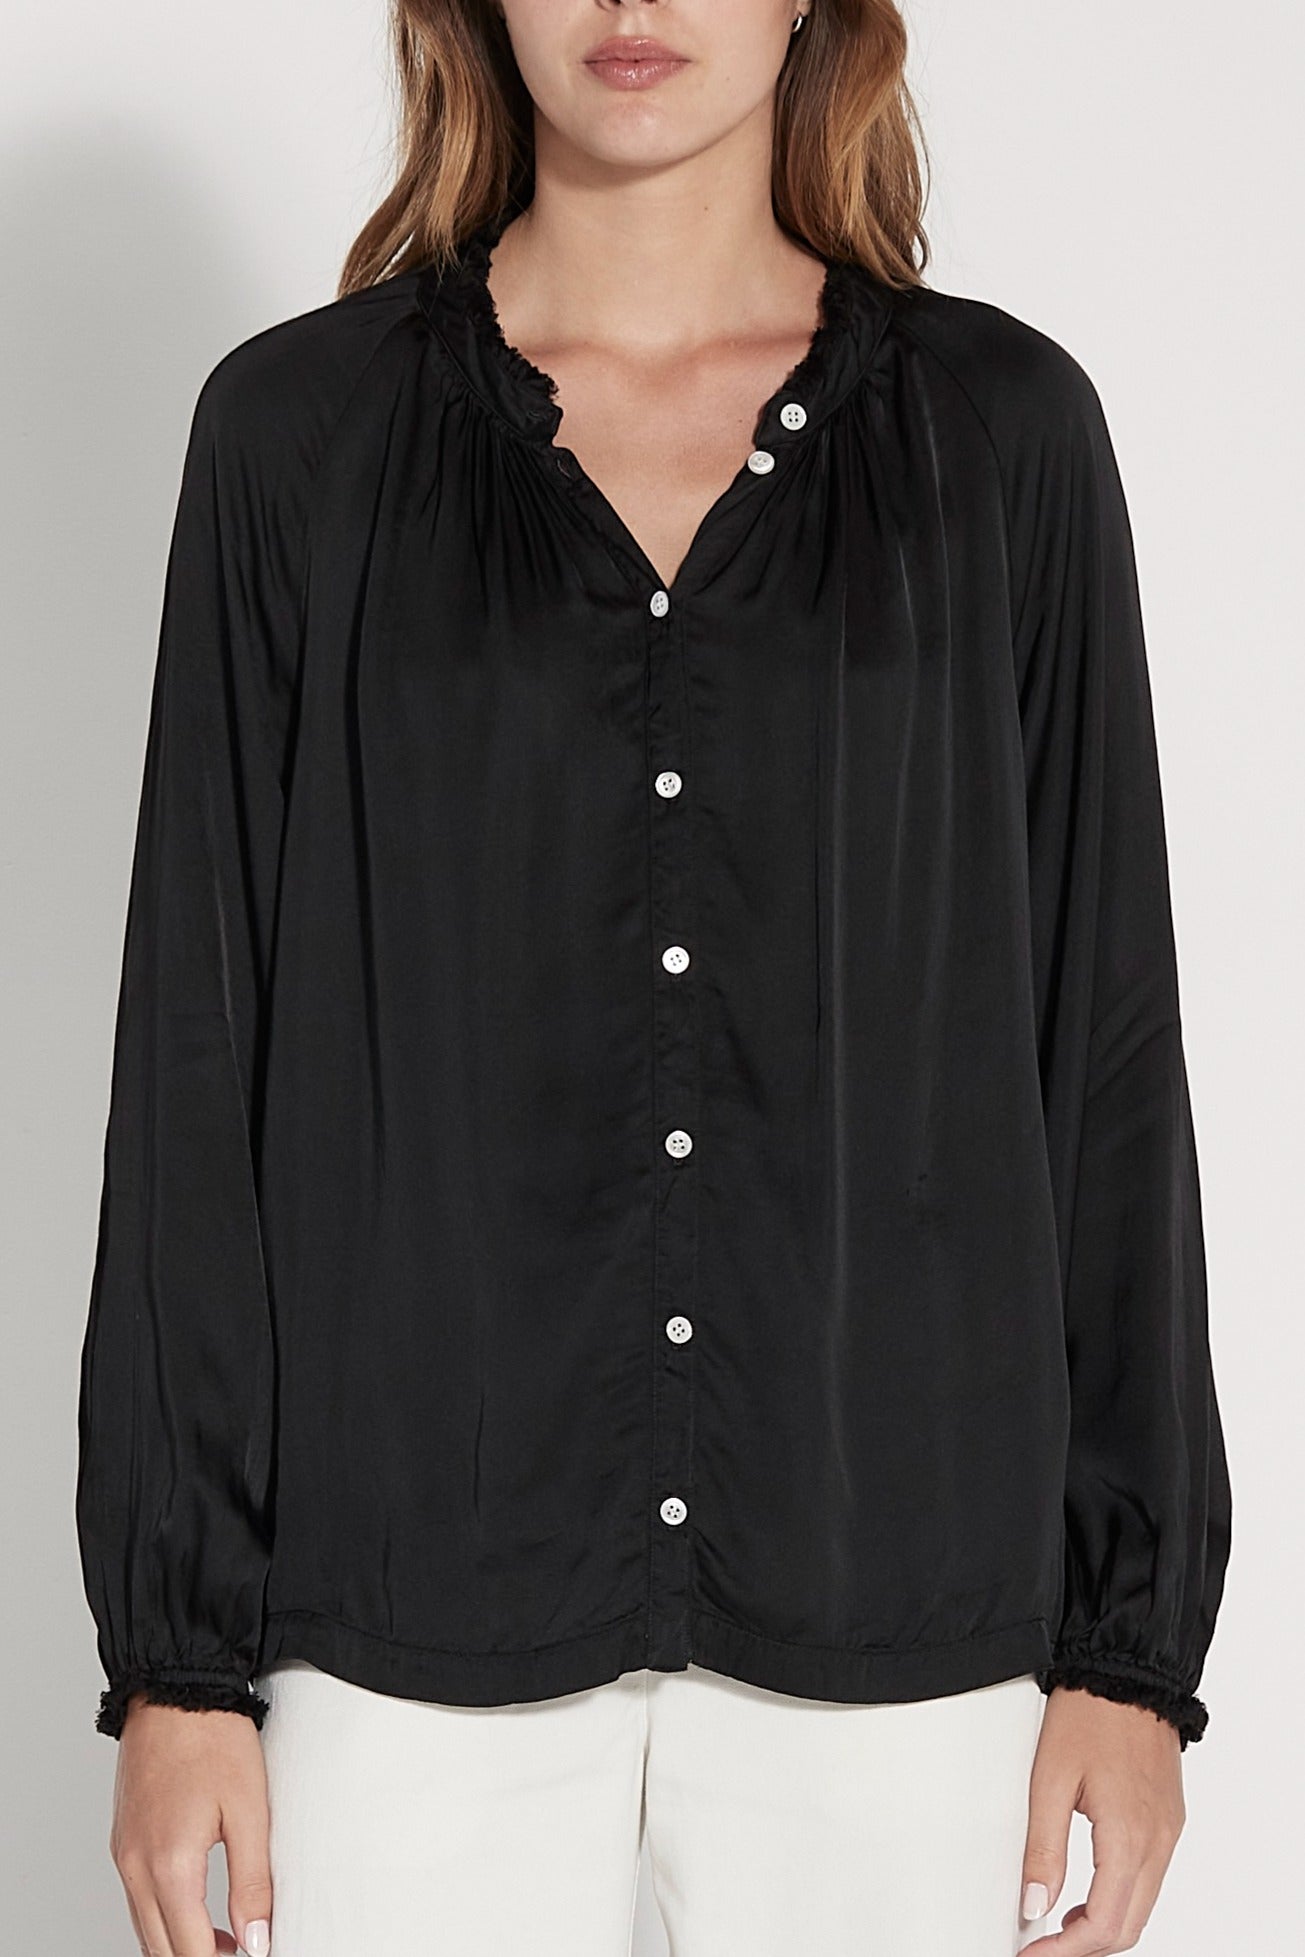 Black Victorian Ruffle Blouse Front Close-Up View